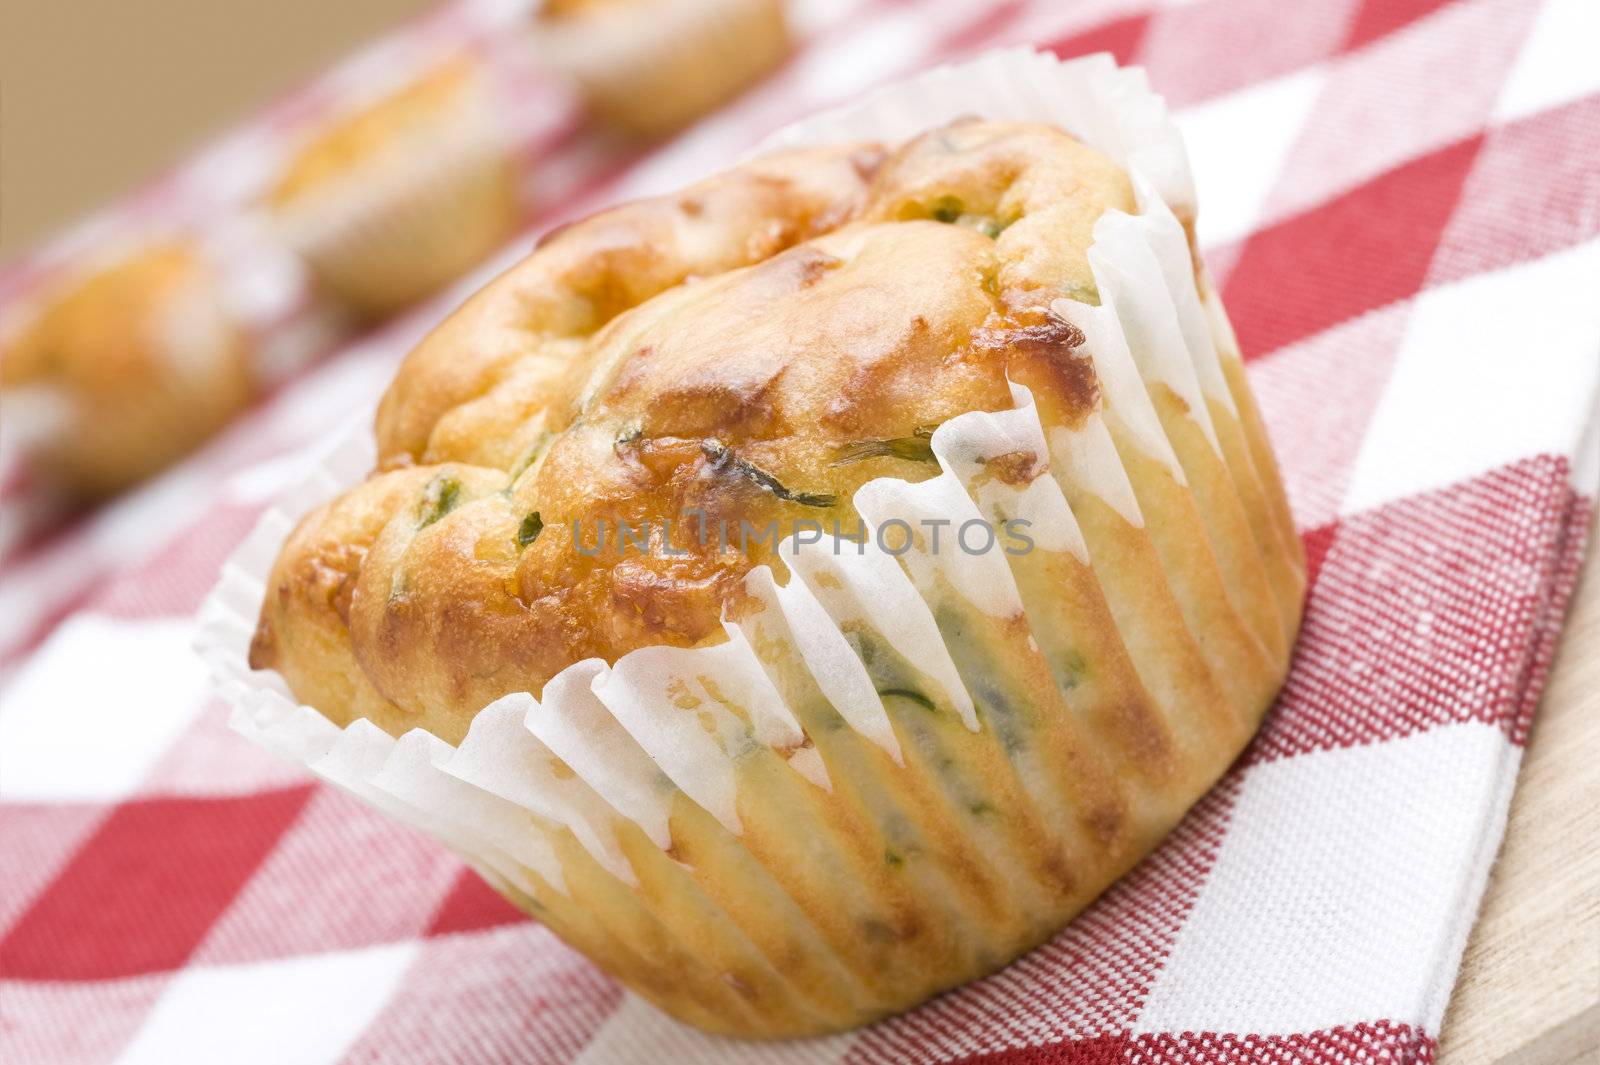 Freshly baked spinach and cheese muffins on a cloth